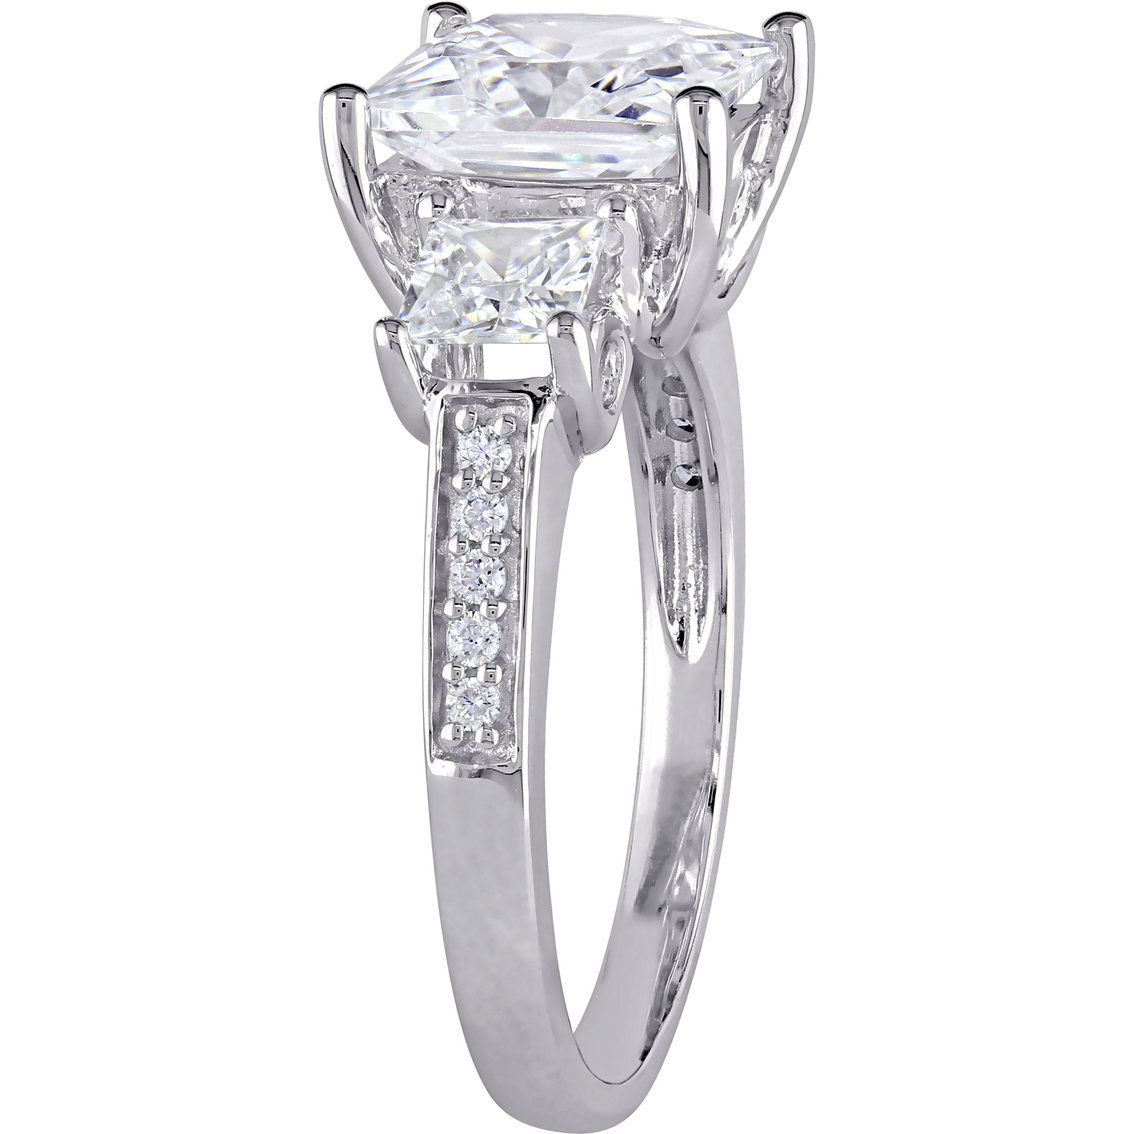 Sofia B. Sterling Silver Cubic Zirconia Princess Cut 3 Stone Engagement Ring - Image 3 of 4